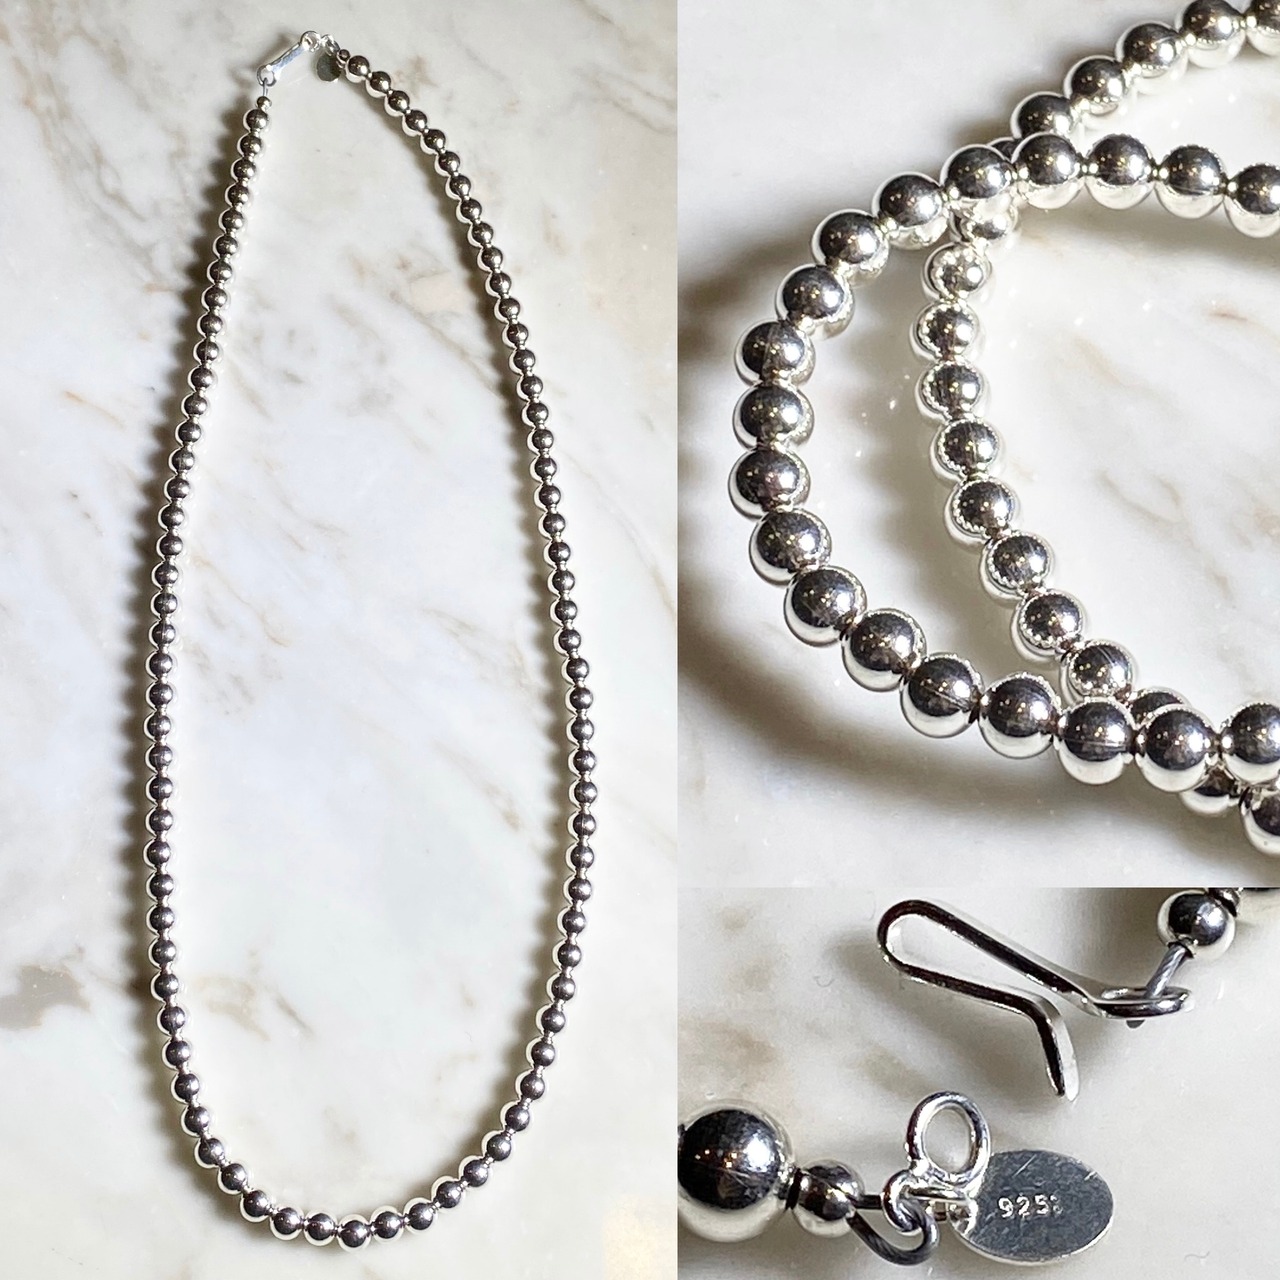 navajo silver beads necklace 51cm φ6mm